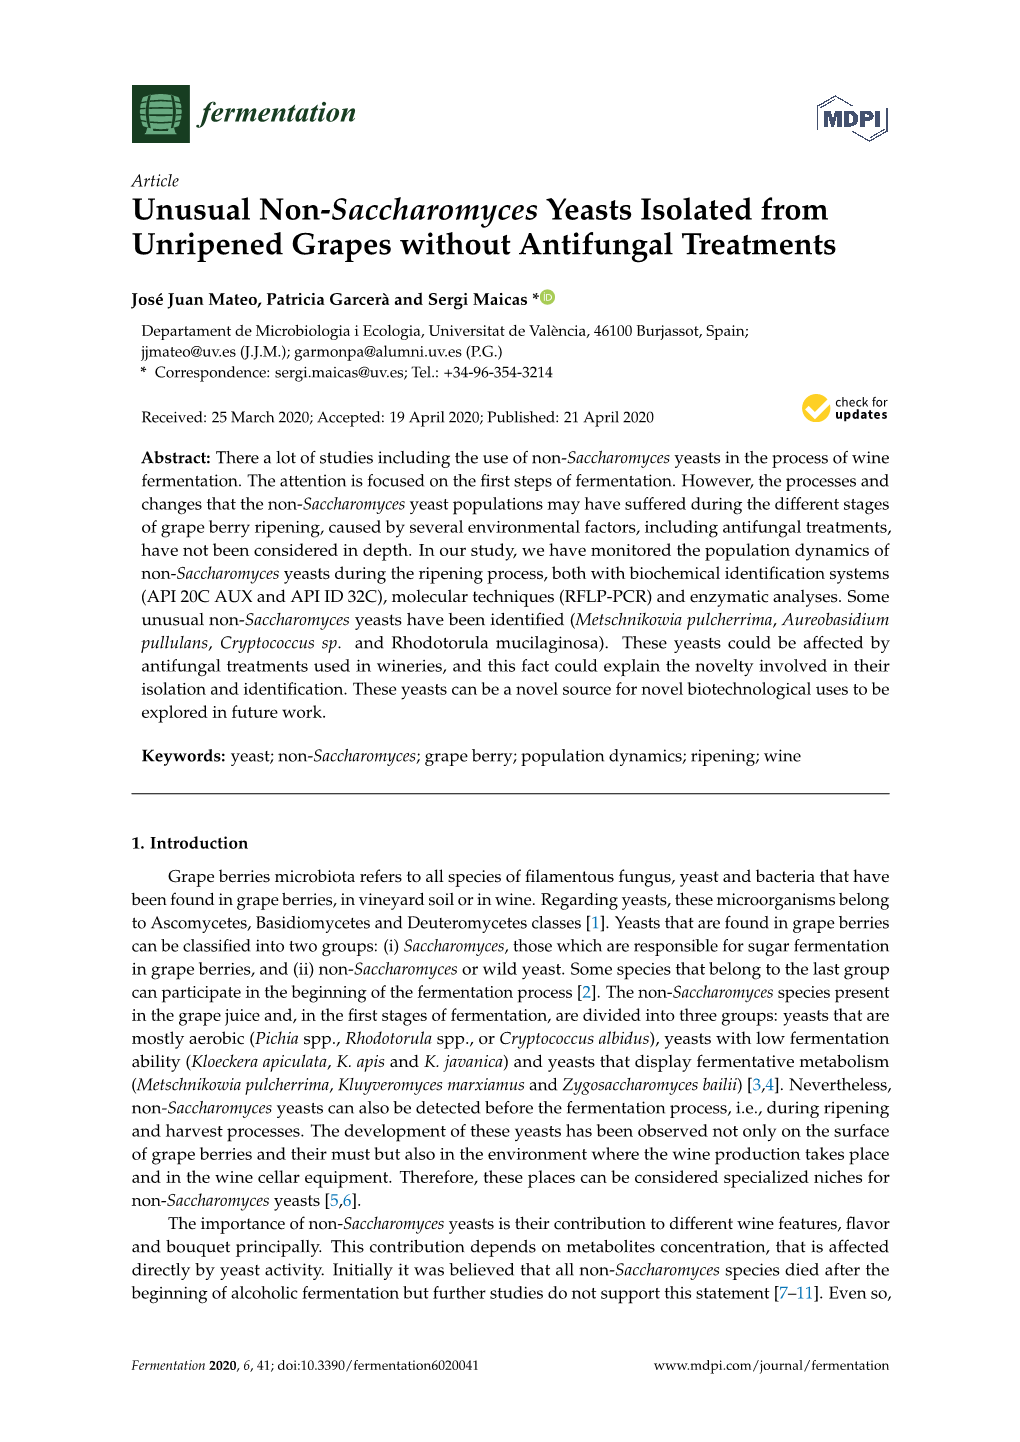 Unusual Non-Saccharomyces Yeasts Isolated from Unripened Grapes Without Antifungal Treatments